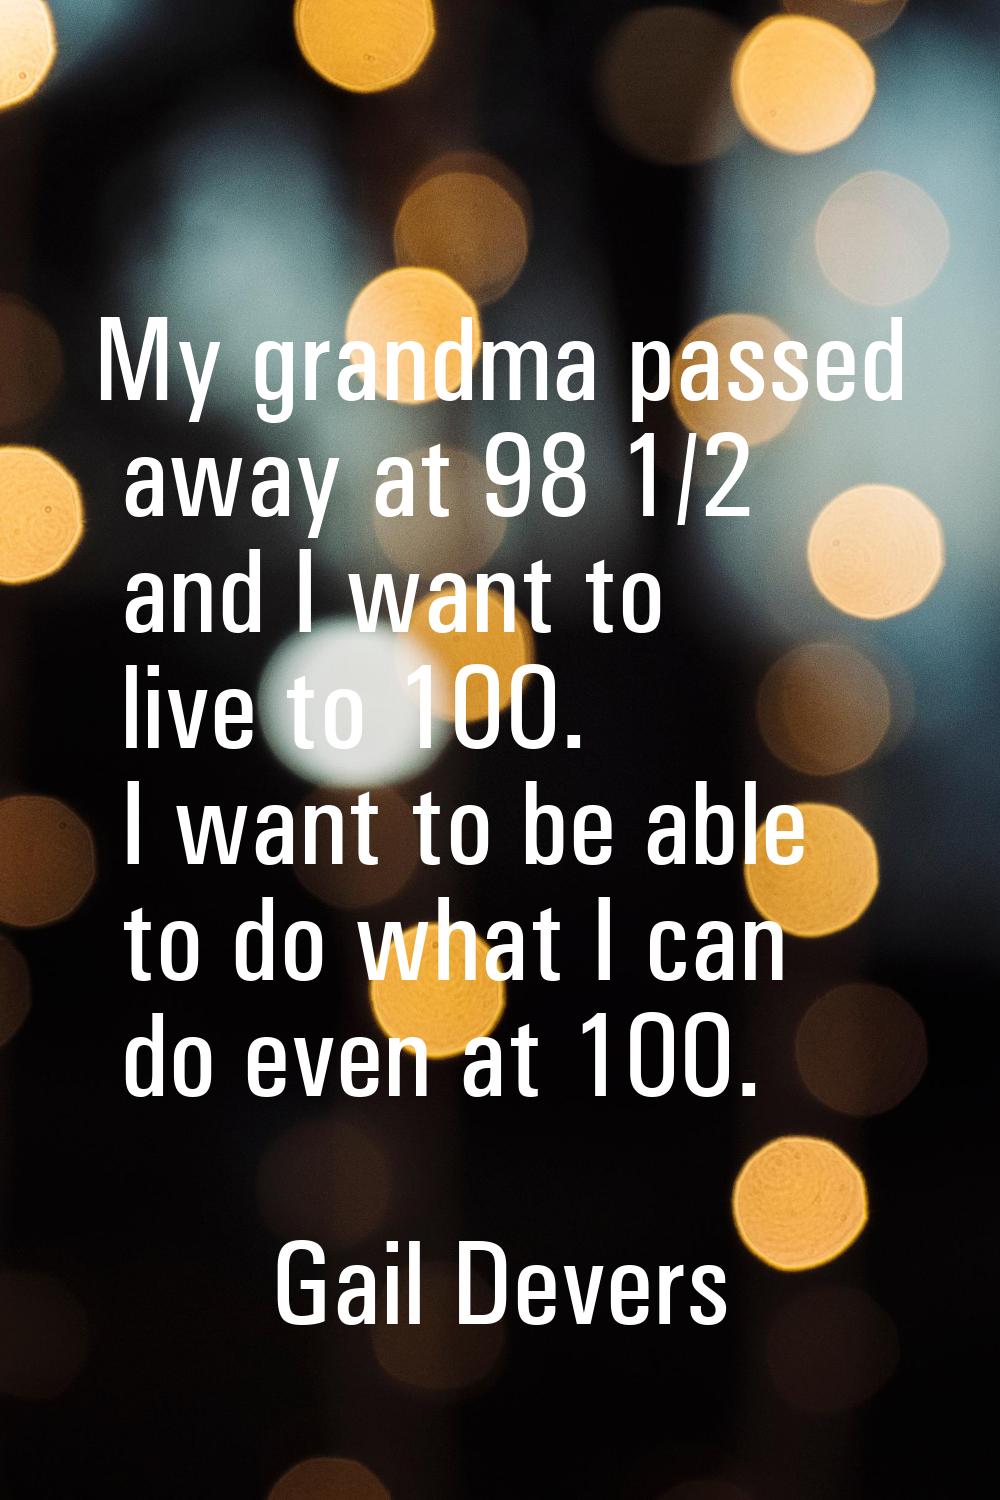 My grandma passed away at 98 1/2 and I want to live to 100. I want to be able to do what I can do e